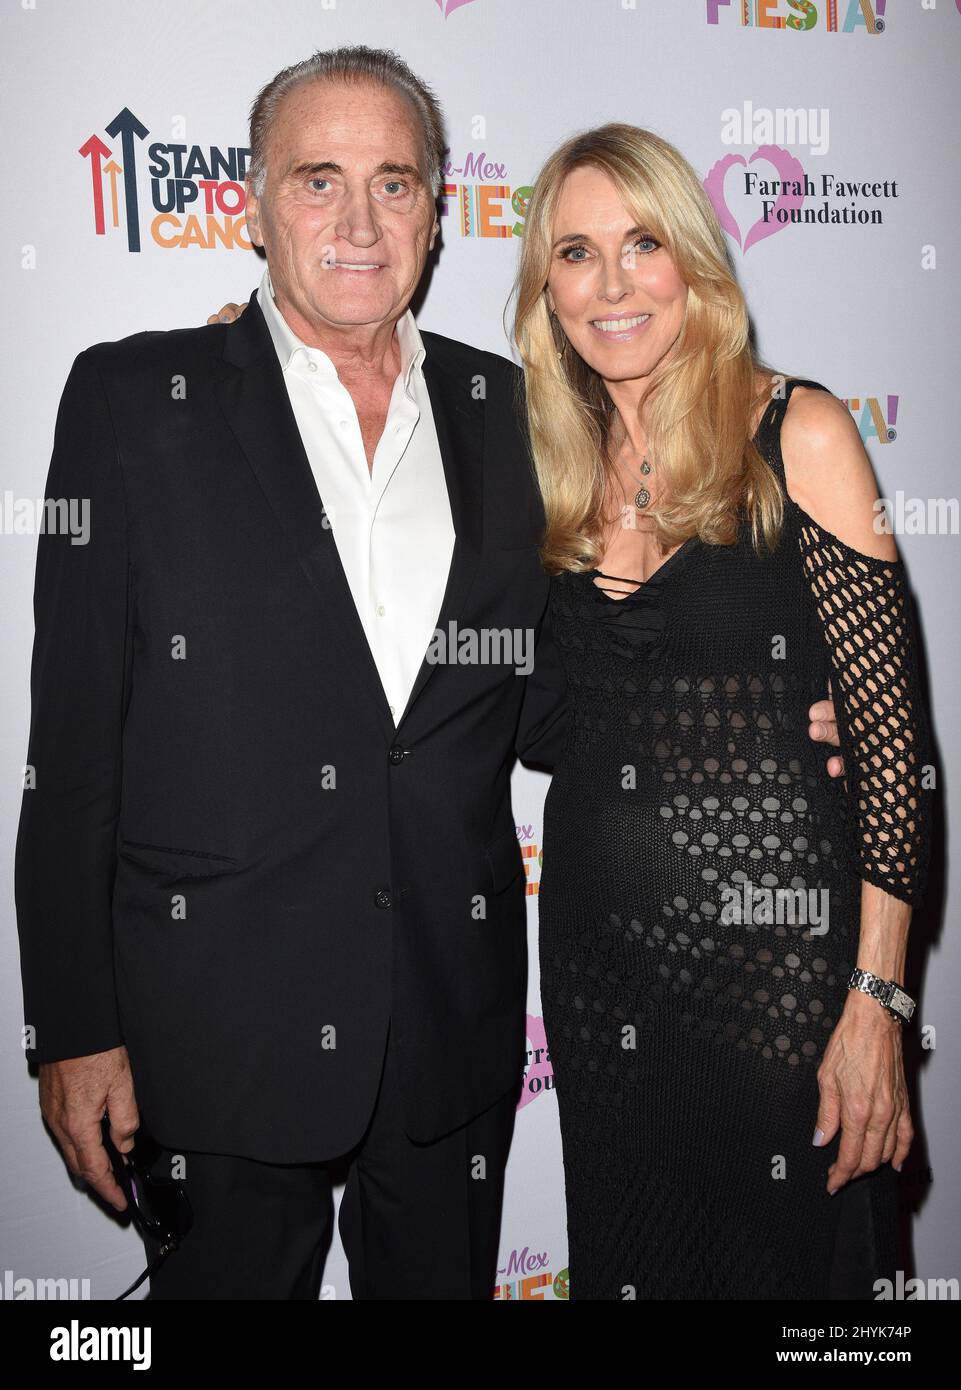 Joe Cortez and Alana Stewart at The Farrah Fawcett Foundation's Tex-Mex Fiesta held at the Wallis Annenberg Center for the Performing Arts on September 6, 2019 in Beverly Hills, USA. Stock Photo